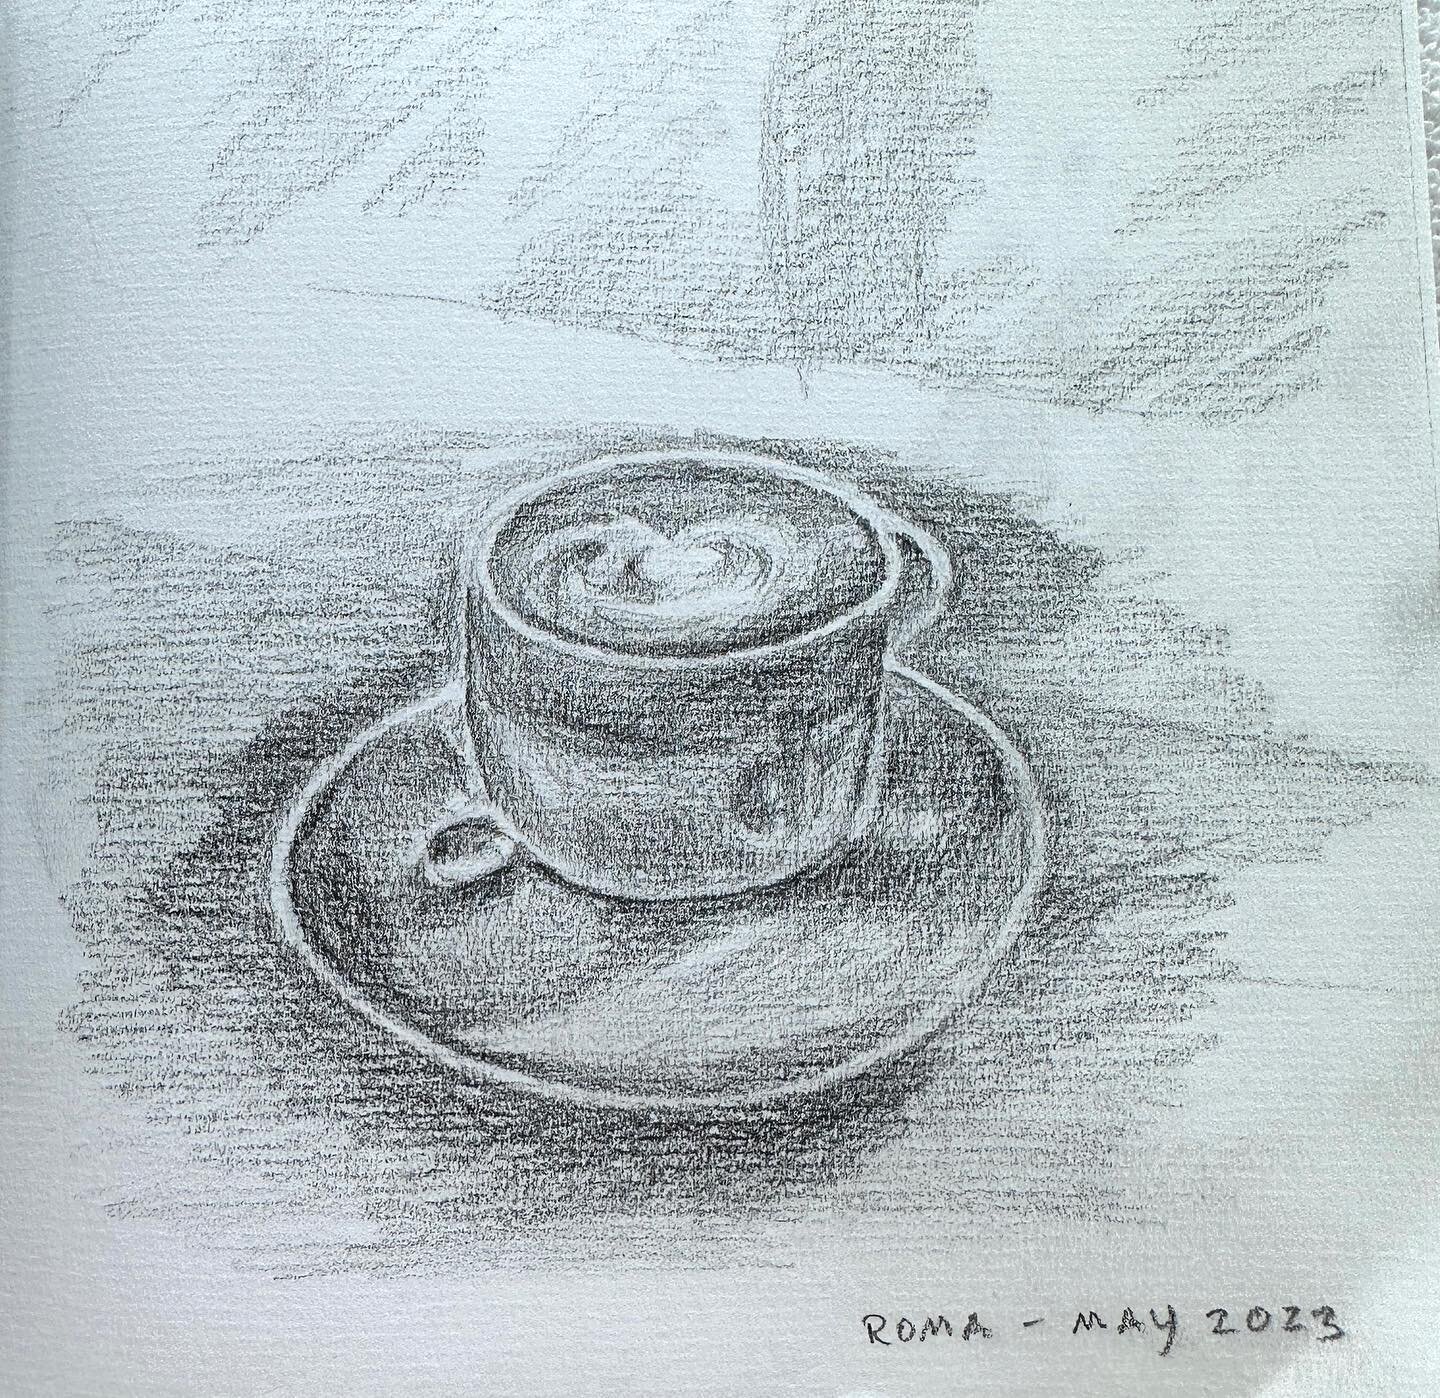 Doing some drawing while in Italy. There&rsquo;s nothing like a cappuccino in Italy!